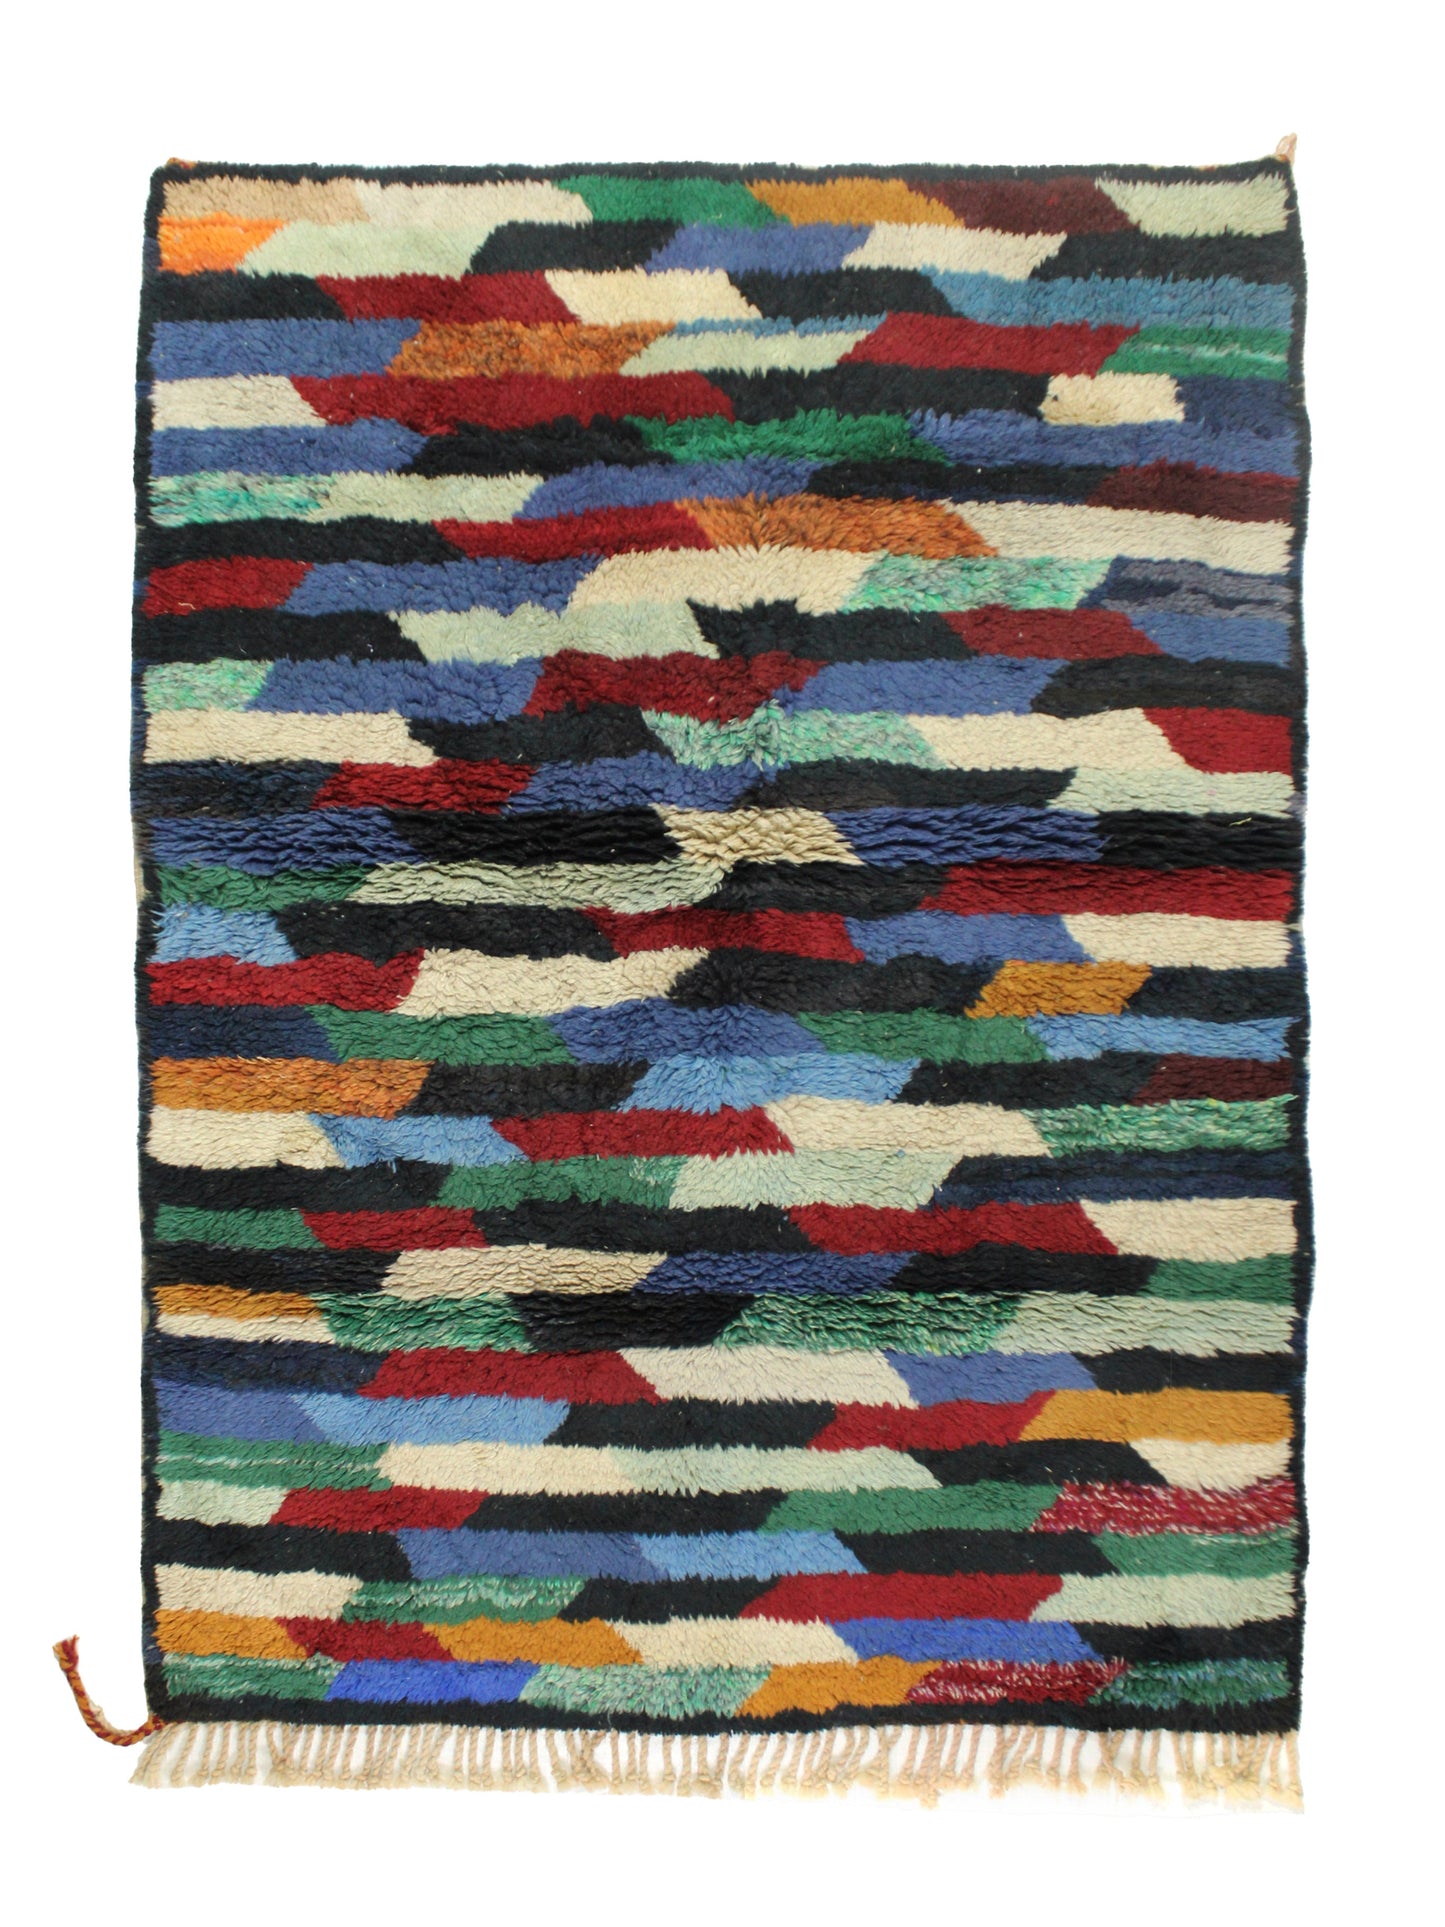 moroccanrugs, carpets, rugs, area rugs, ruggable rugs, outdoor rugs